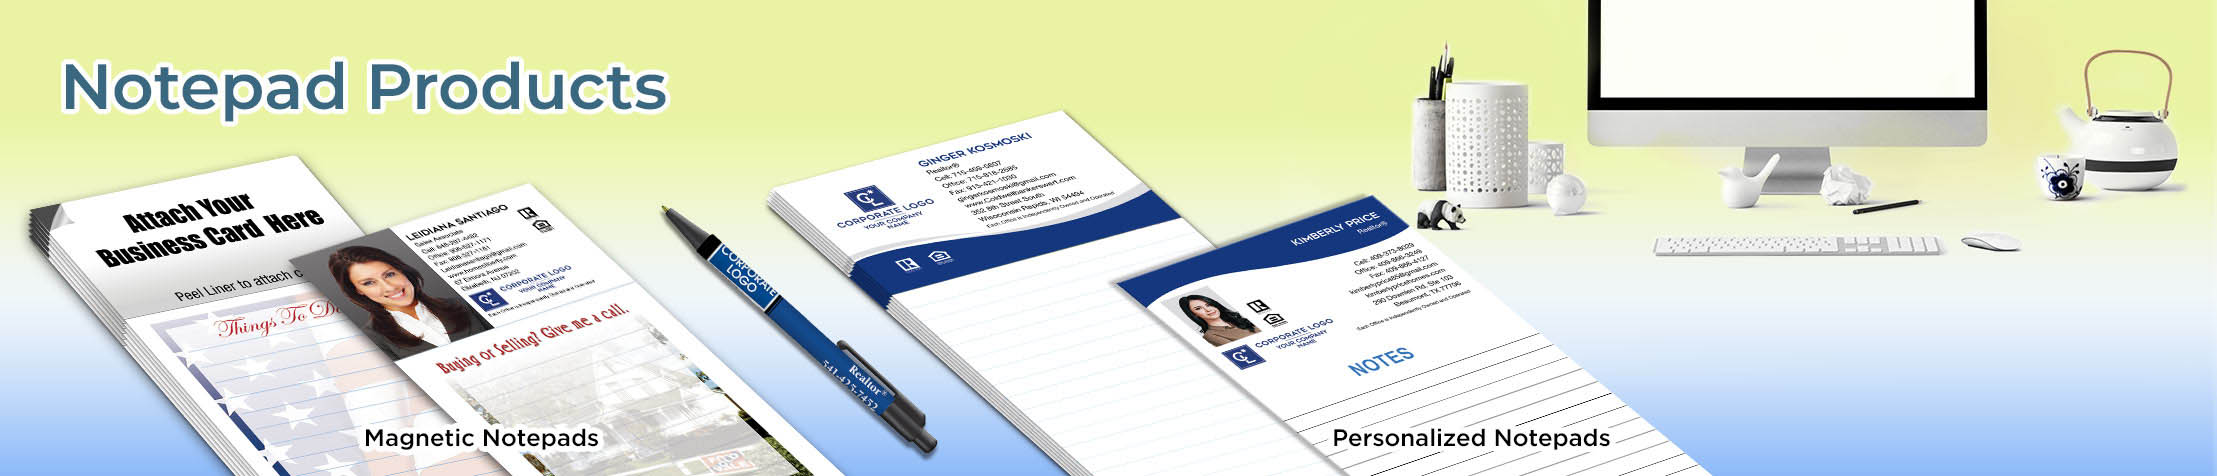 Coldwell Banker Real Estate Notepads - Coldwell Banker custom stationery and marketing tools, magnetic and personalized notepads | BestPrintBuy.com